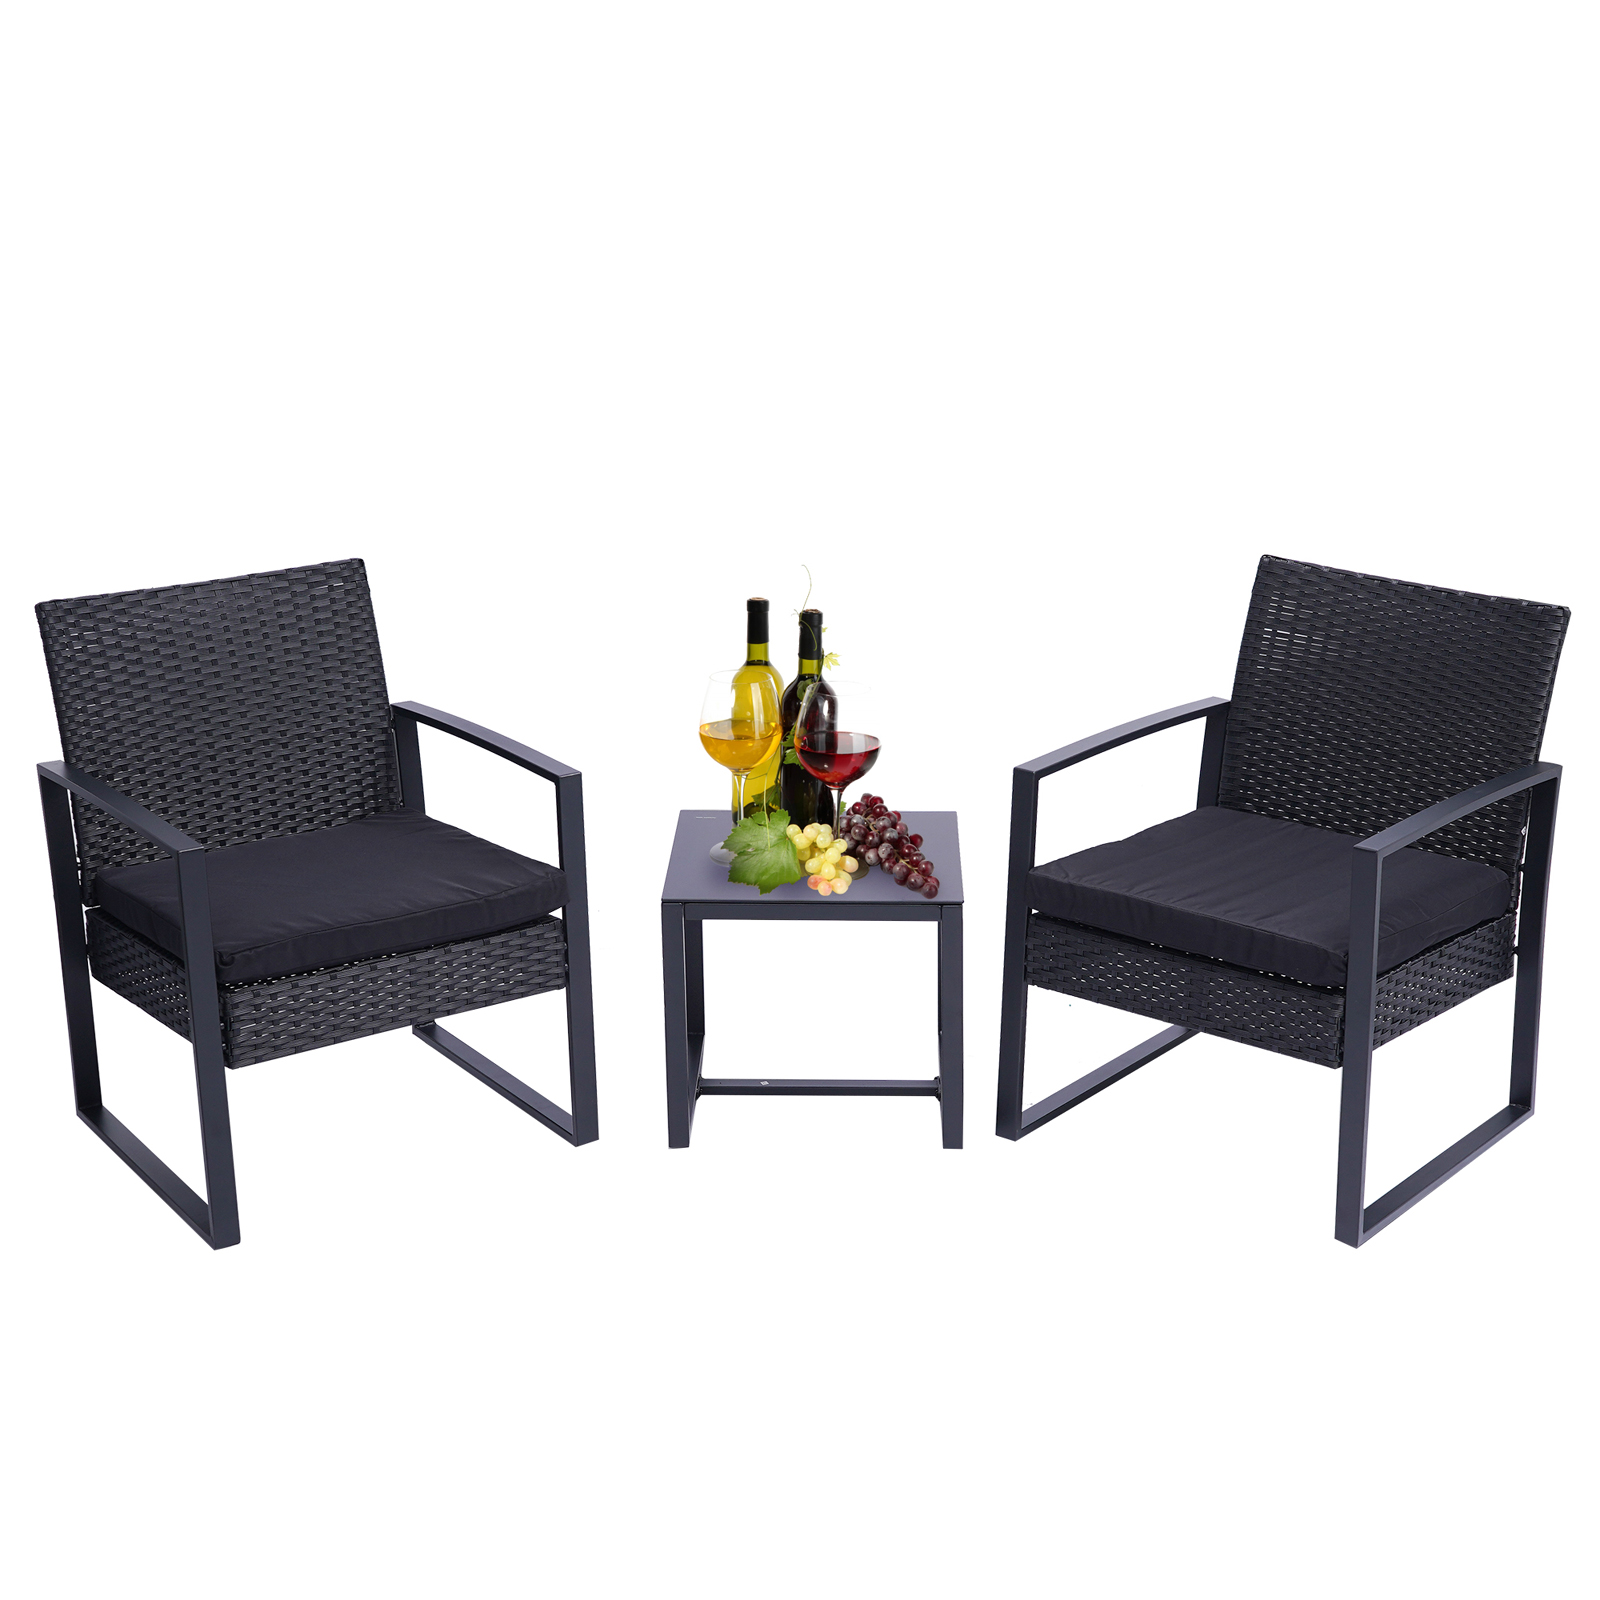 3 Piece Patio Furniture Set, SEGMART Outdoor Wicker Conversation Bistro Set, Outdoor All Weather PE Wicker Chairs with Cushions and Glass Coffee Table for Backyard Porch Lawn Garden Balcony, LL778 - image 2 of 7